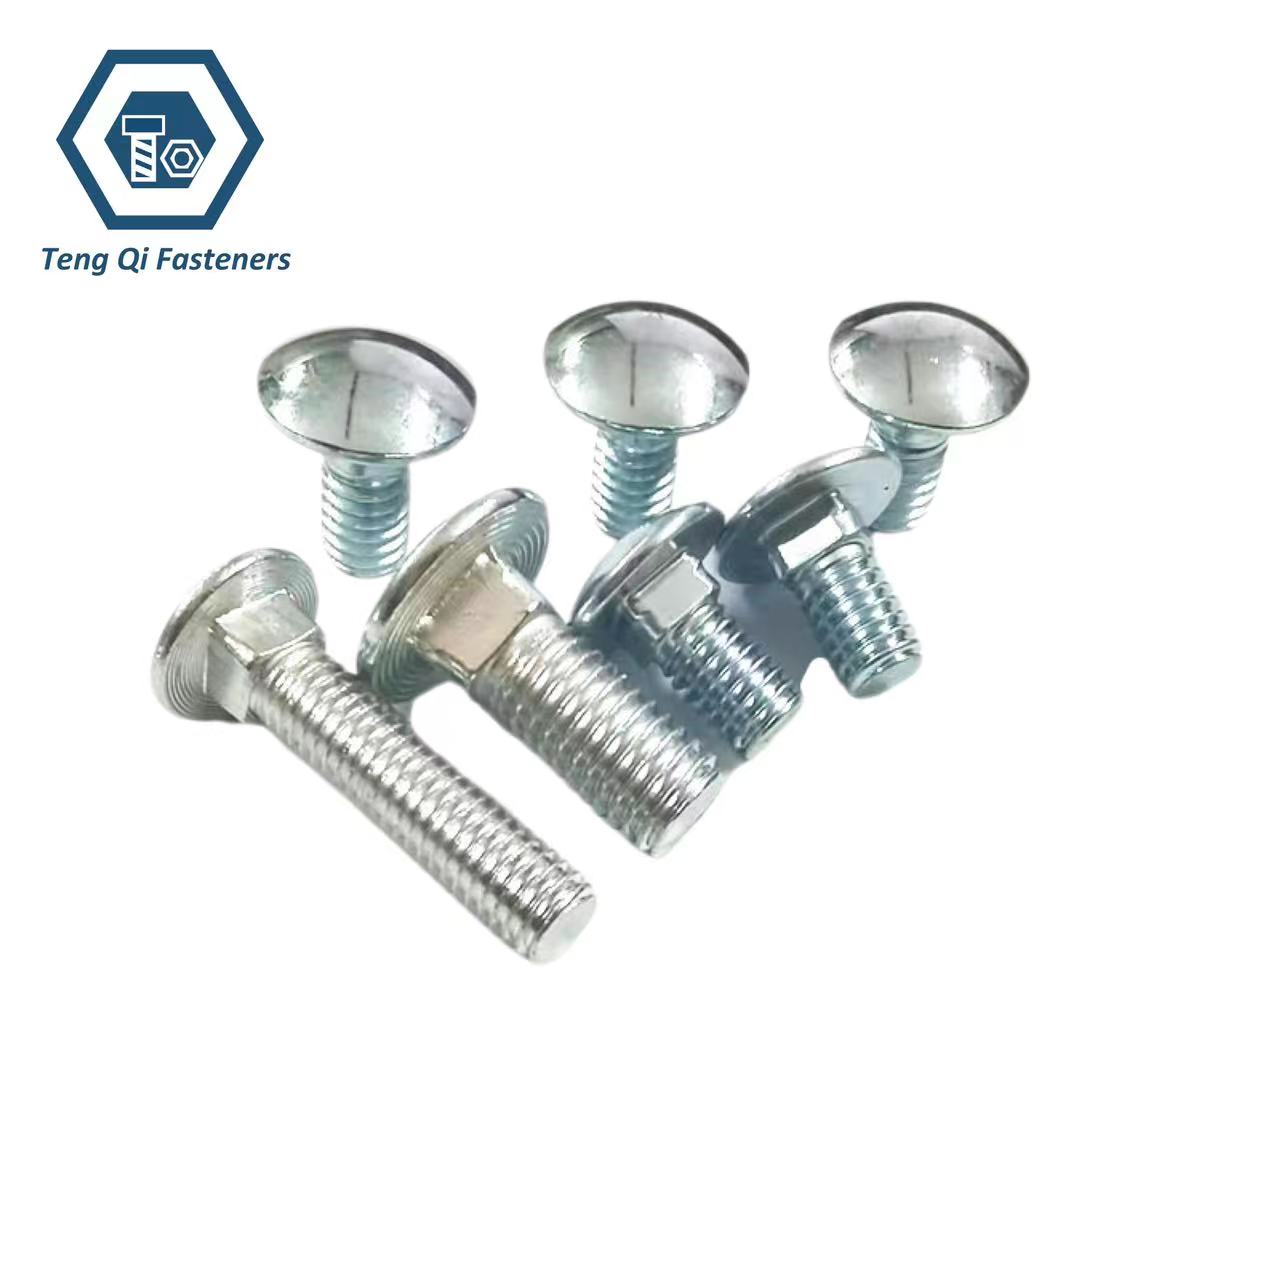 ASMEANSI B 18.5 American Standard Zinc Plated Full Thread Round Head Square Neck Bolts